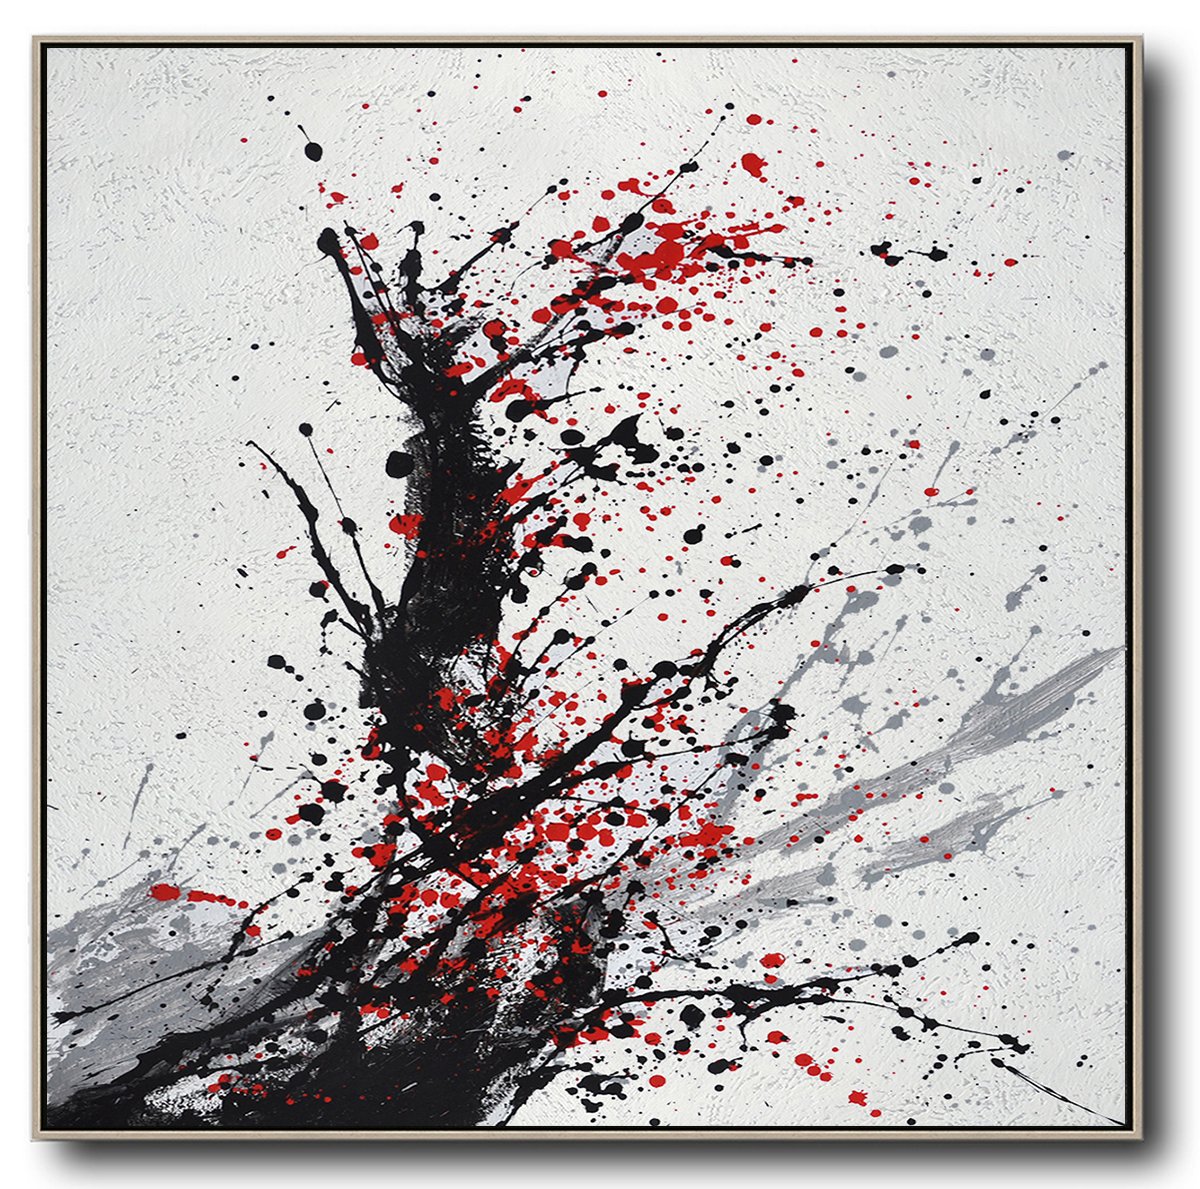 Hand-Painted Minimalist Drip Painting On Canvas, Black, White, Grey, Red - Grey And Blue Abstract Art Foyer Large